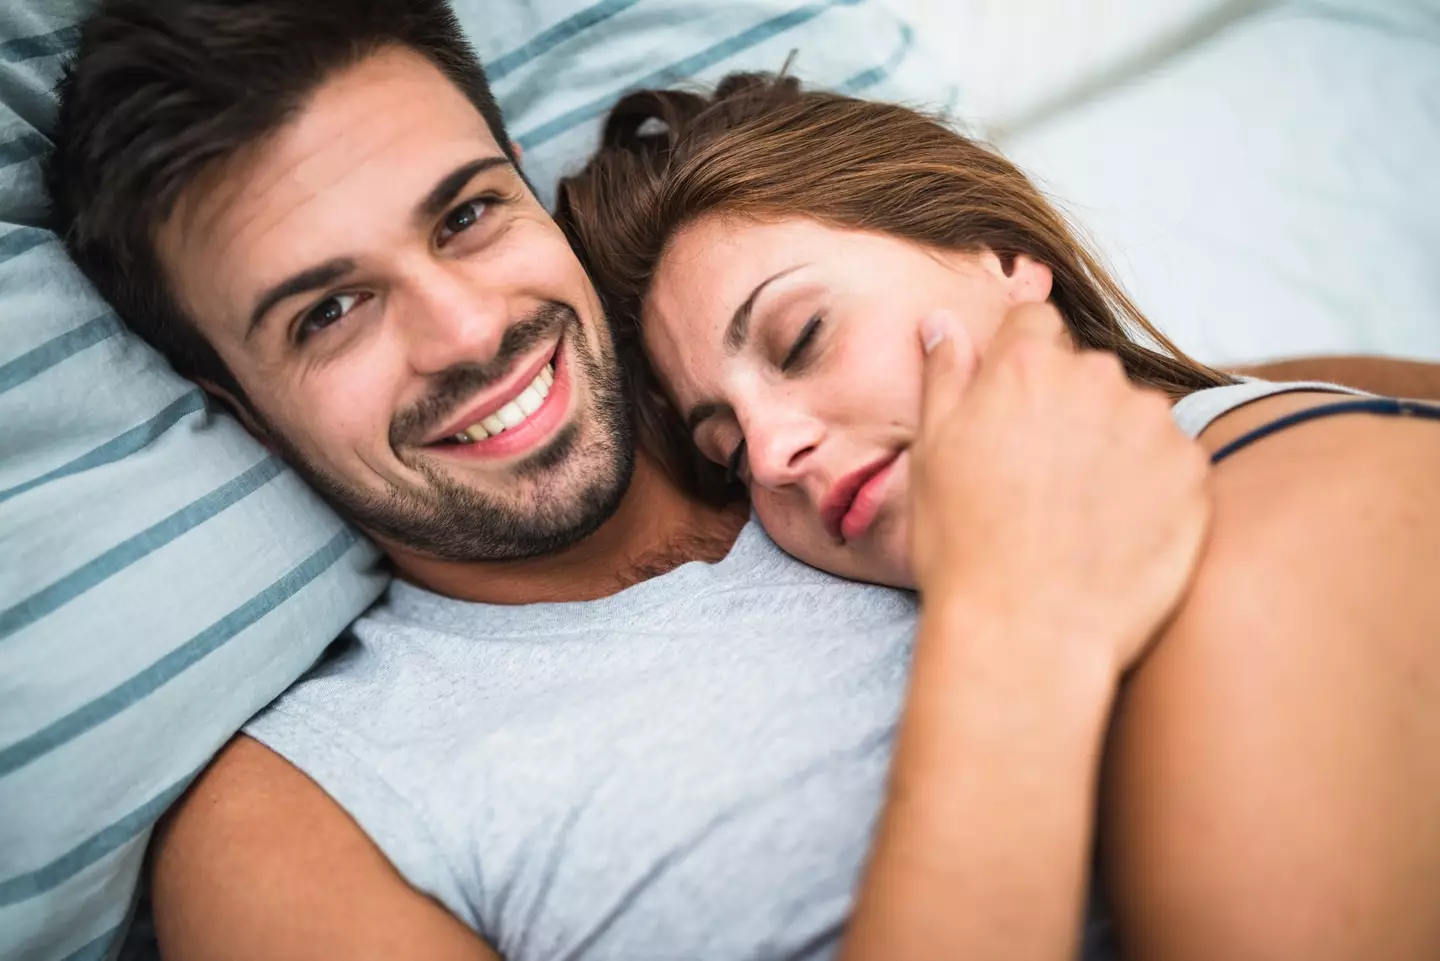 The average number of sexual partners is surprising.